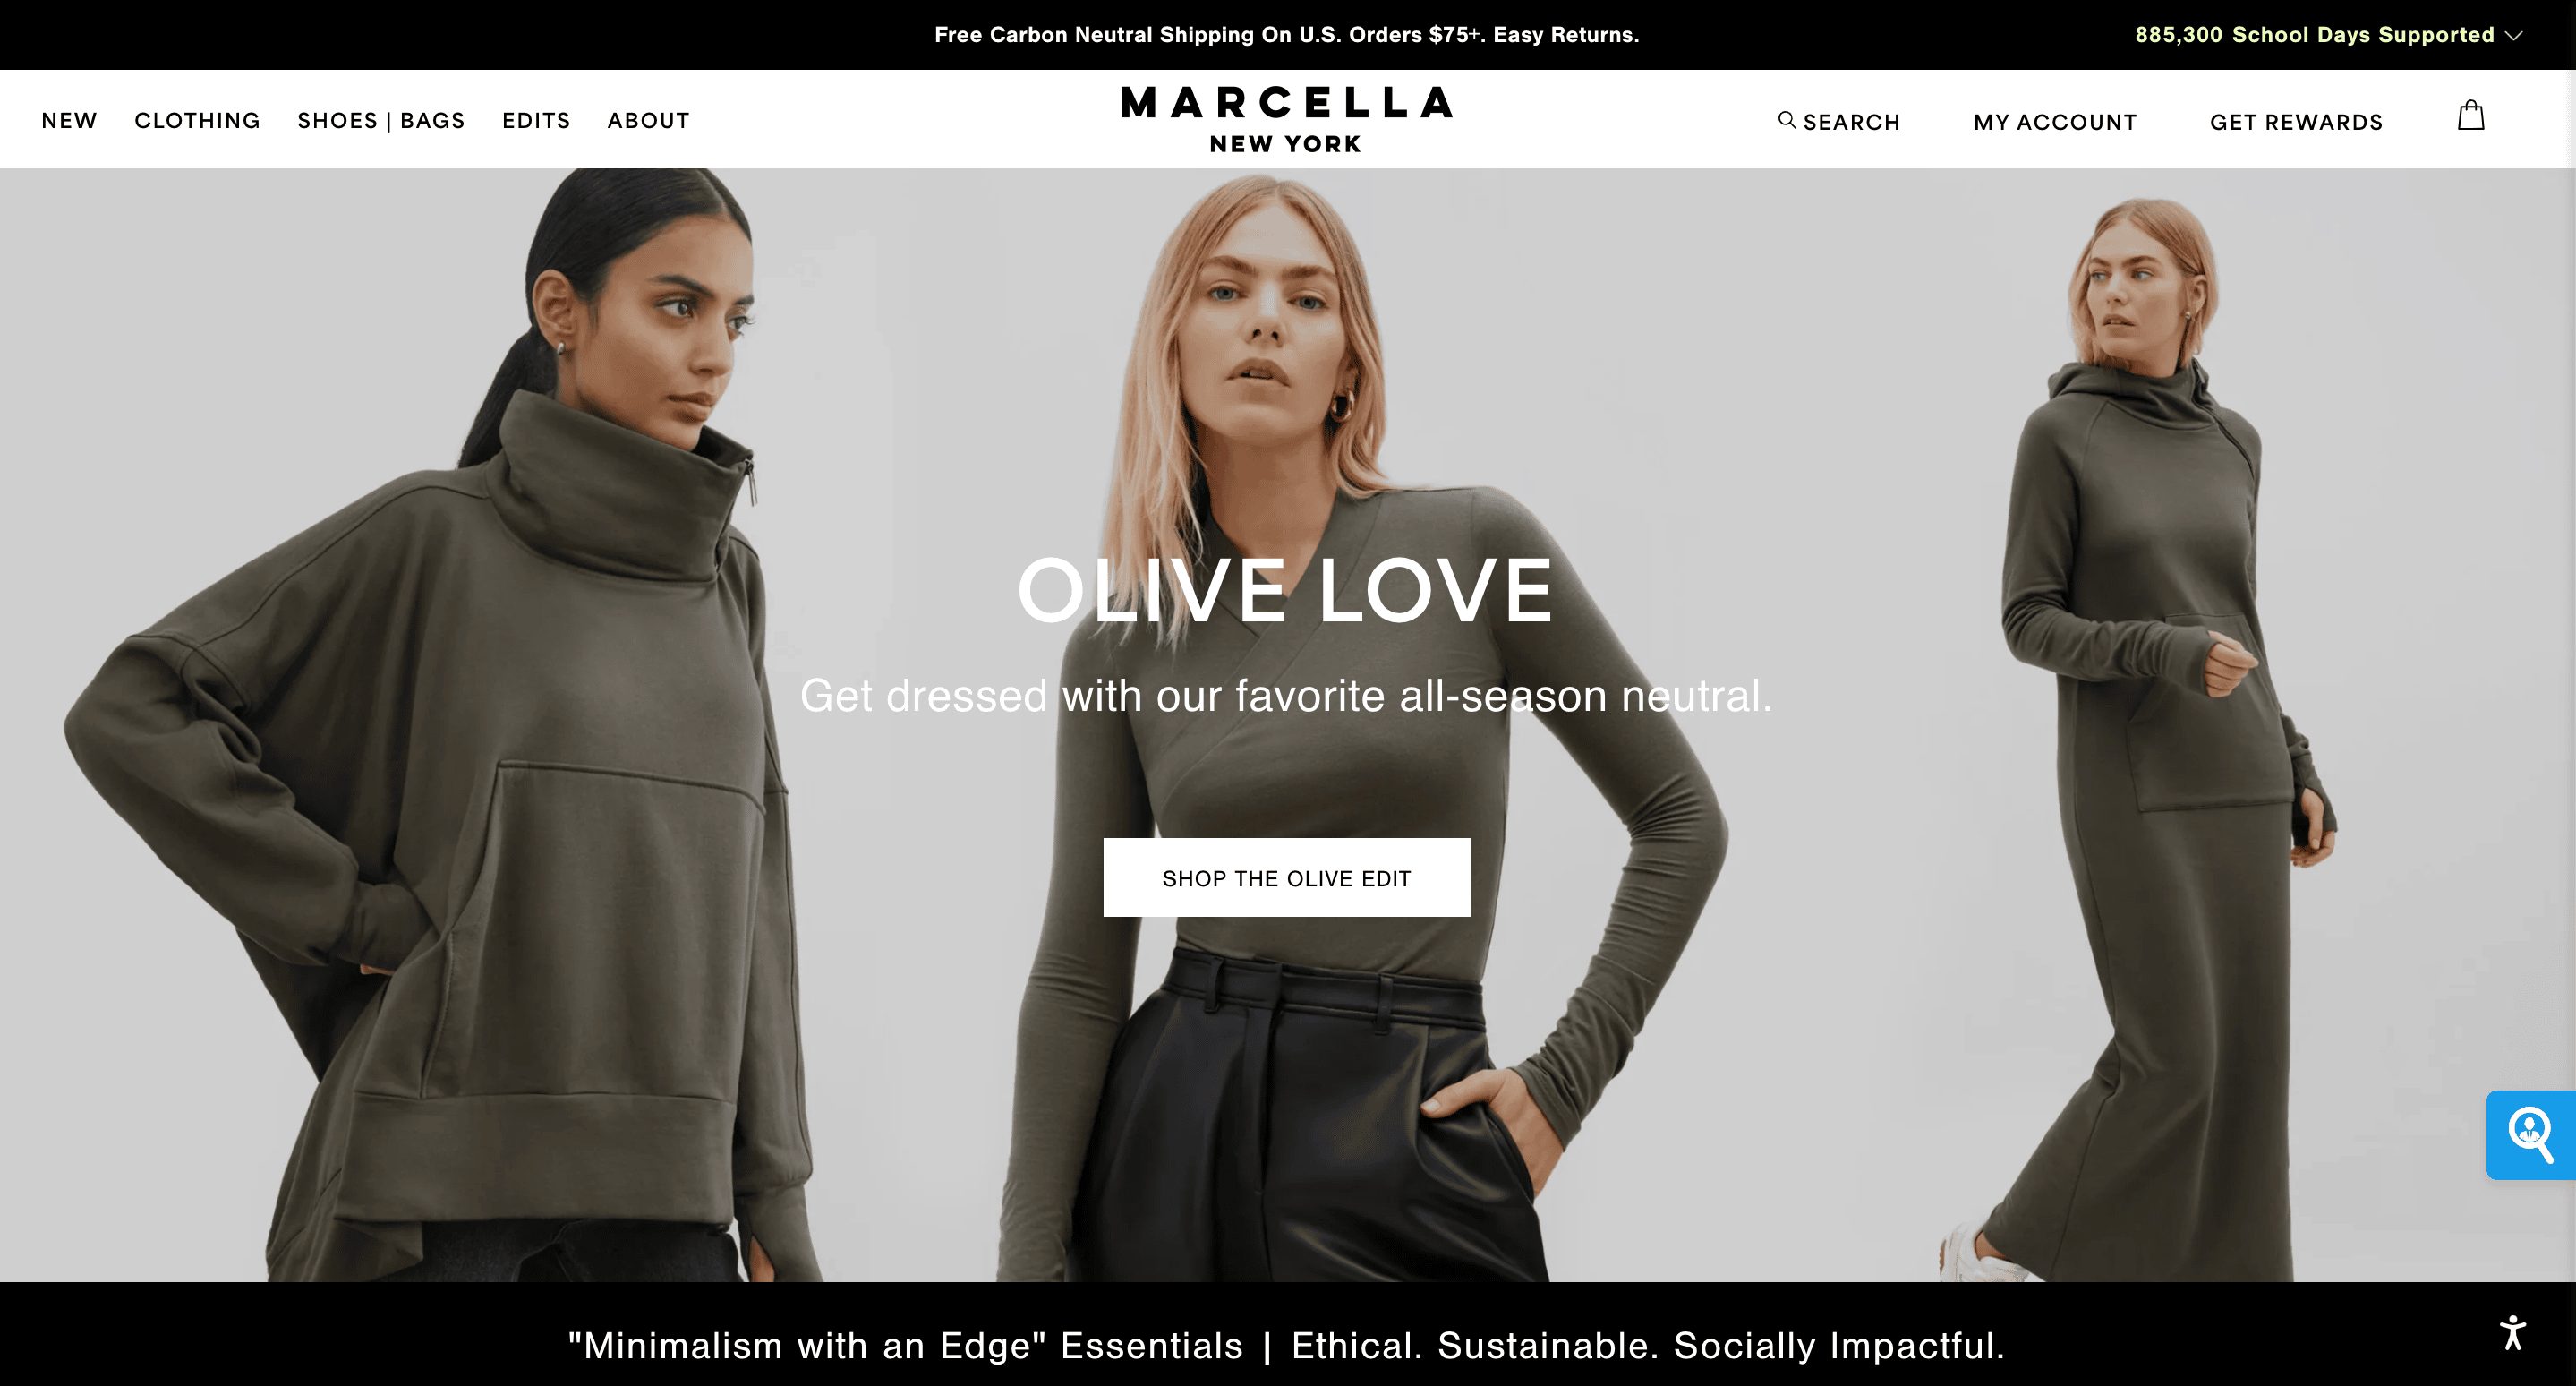 This website serves as Marcel's ultimate guide to his clothing brand, showcasing his products in the market.